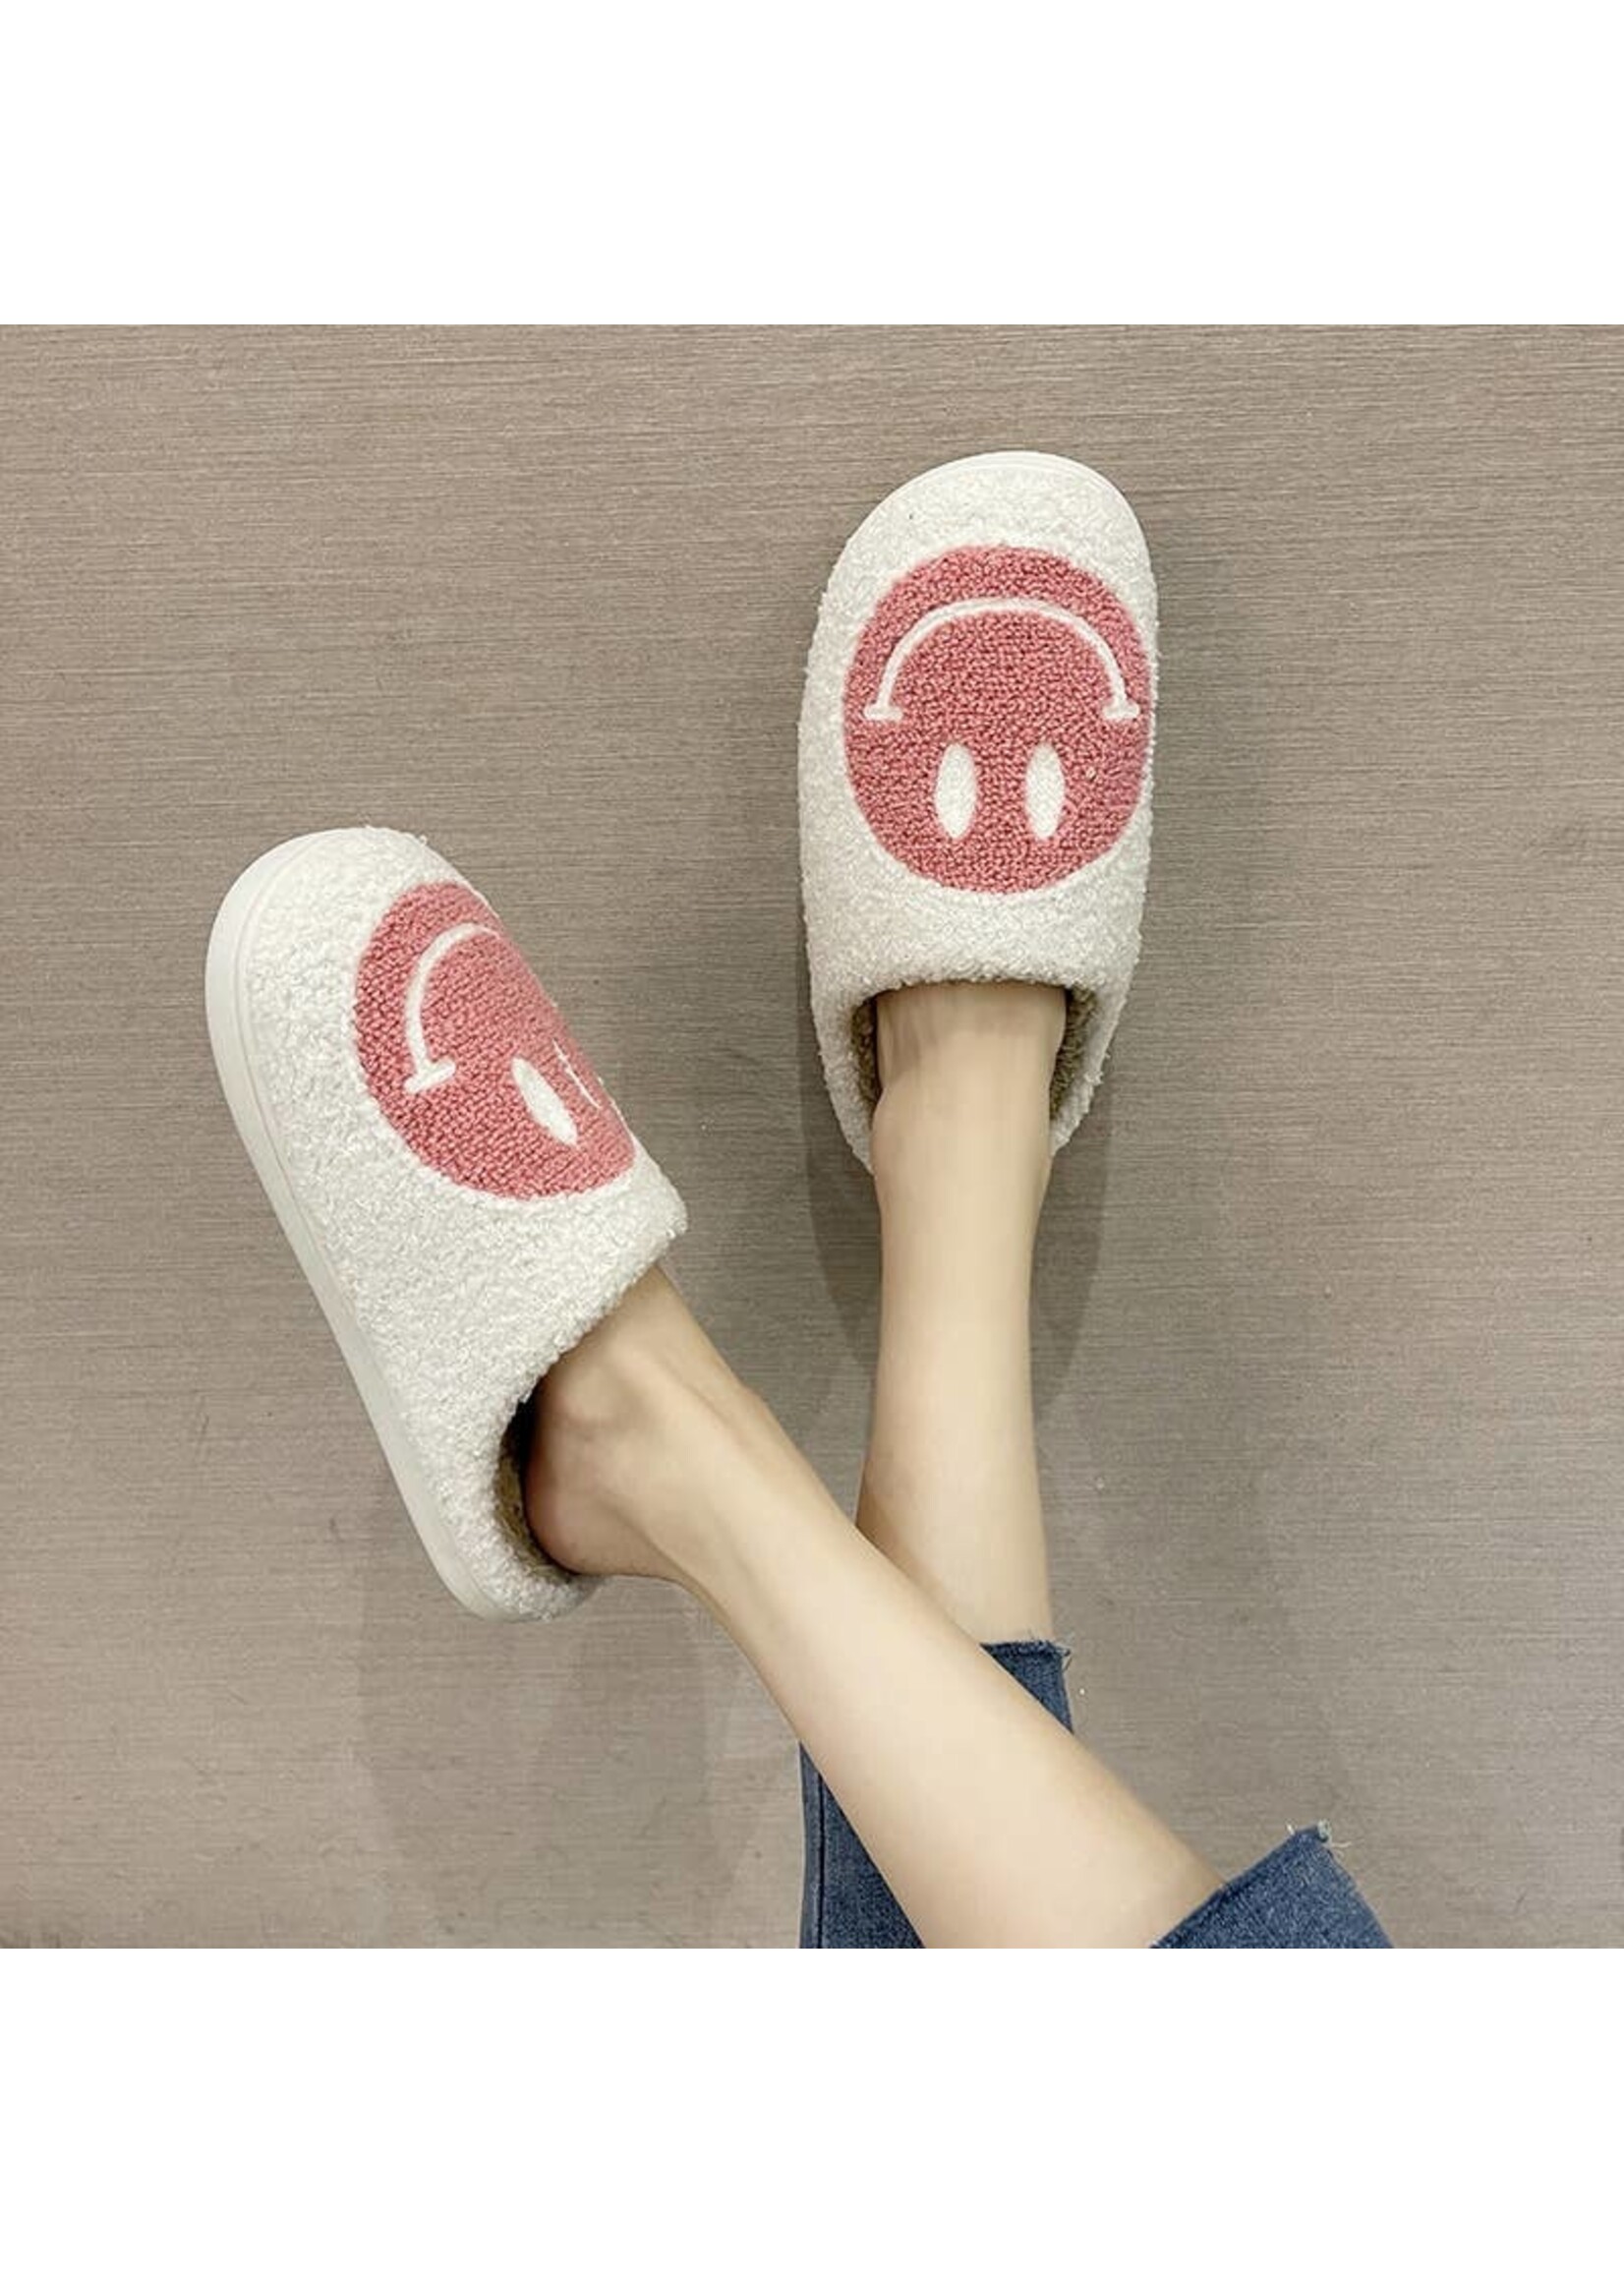 Smile Face Slippers 2